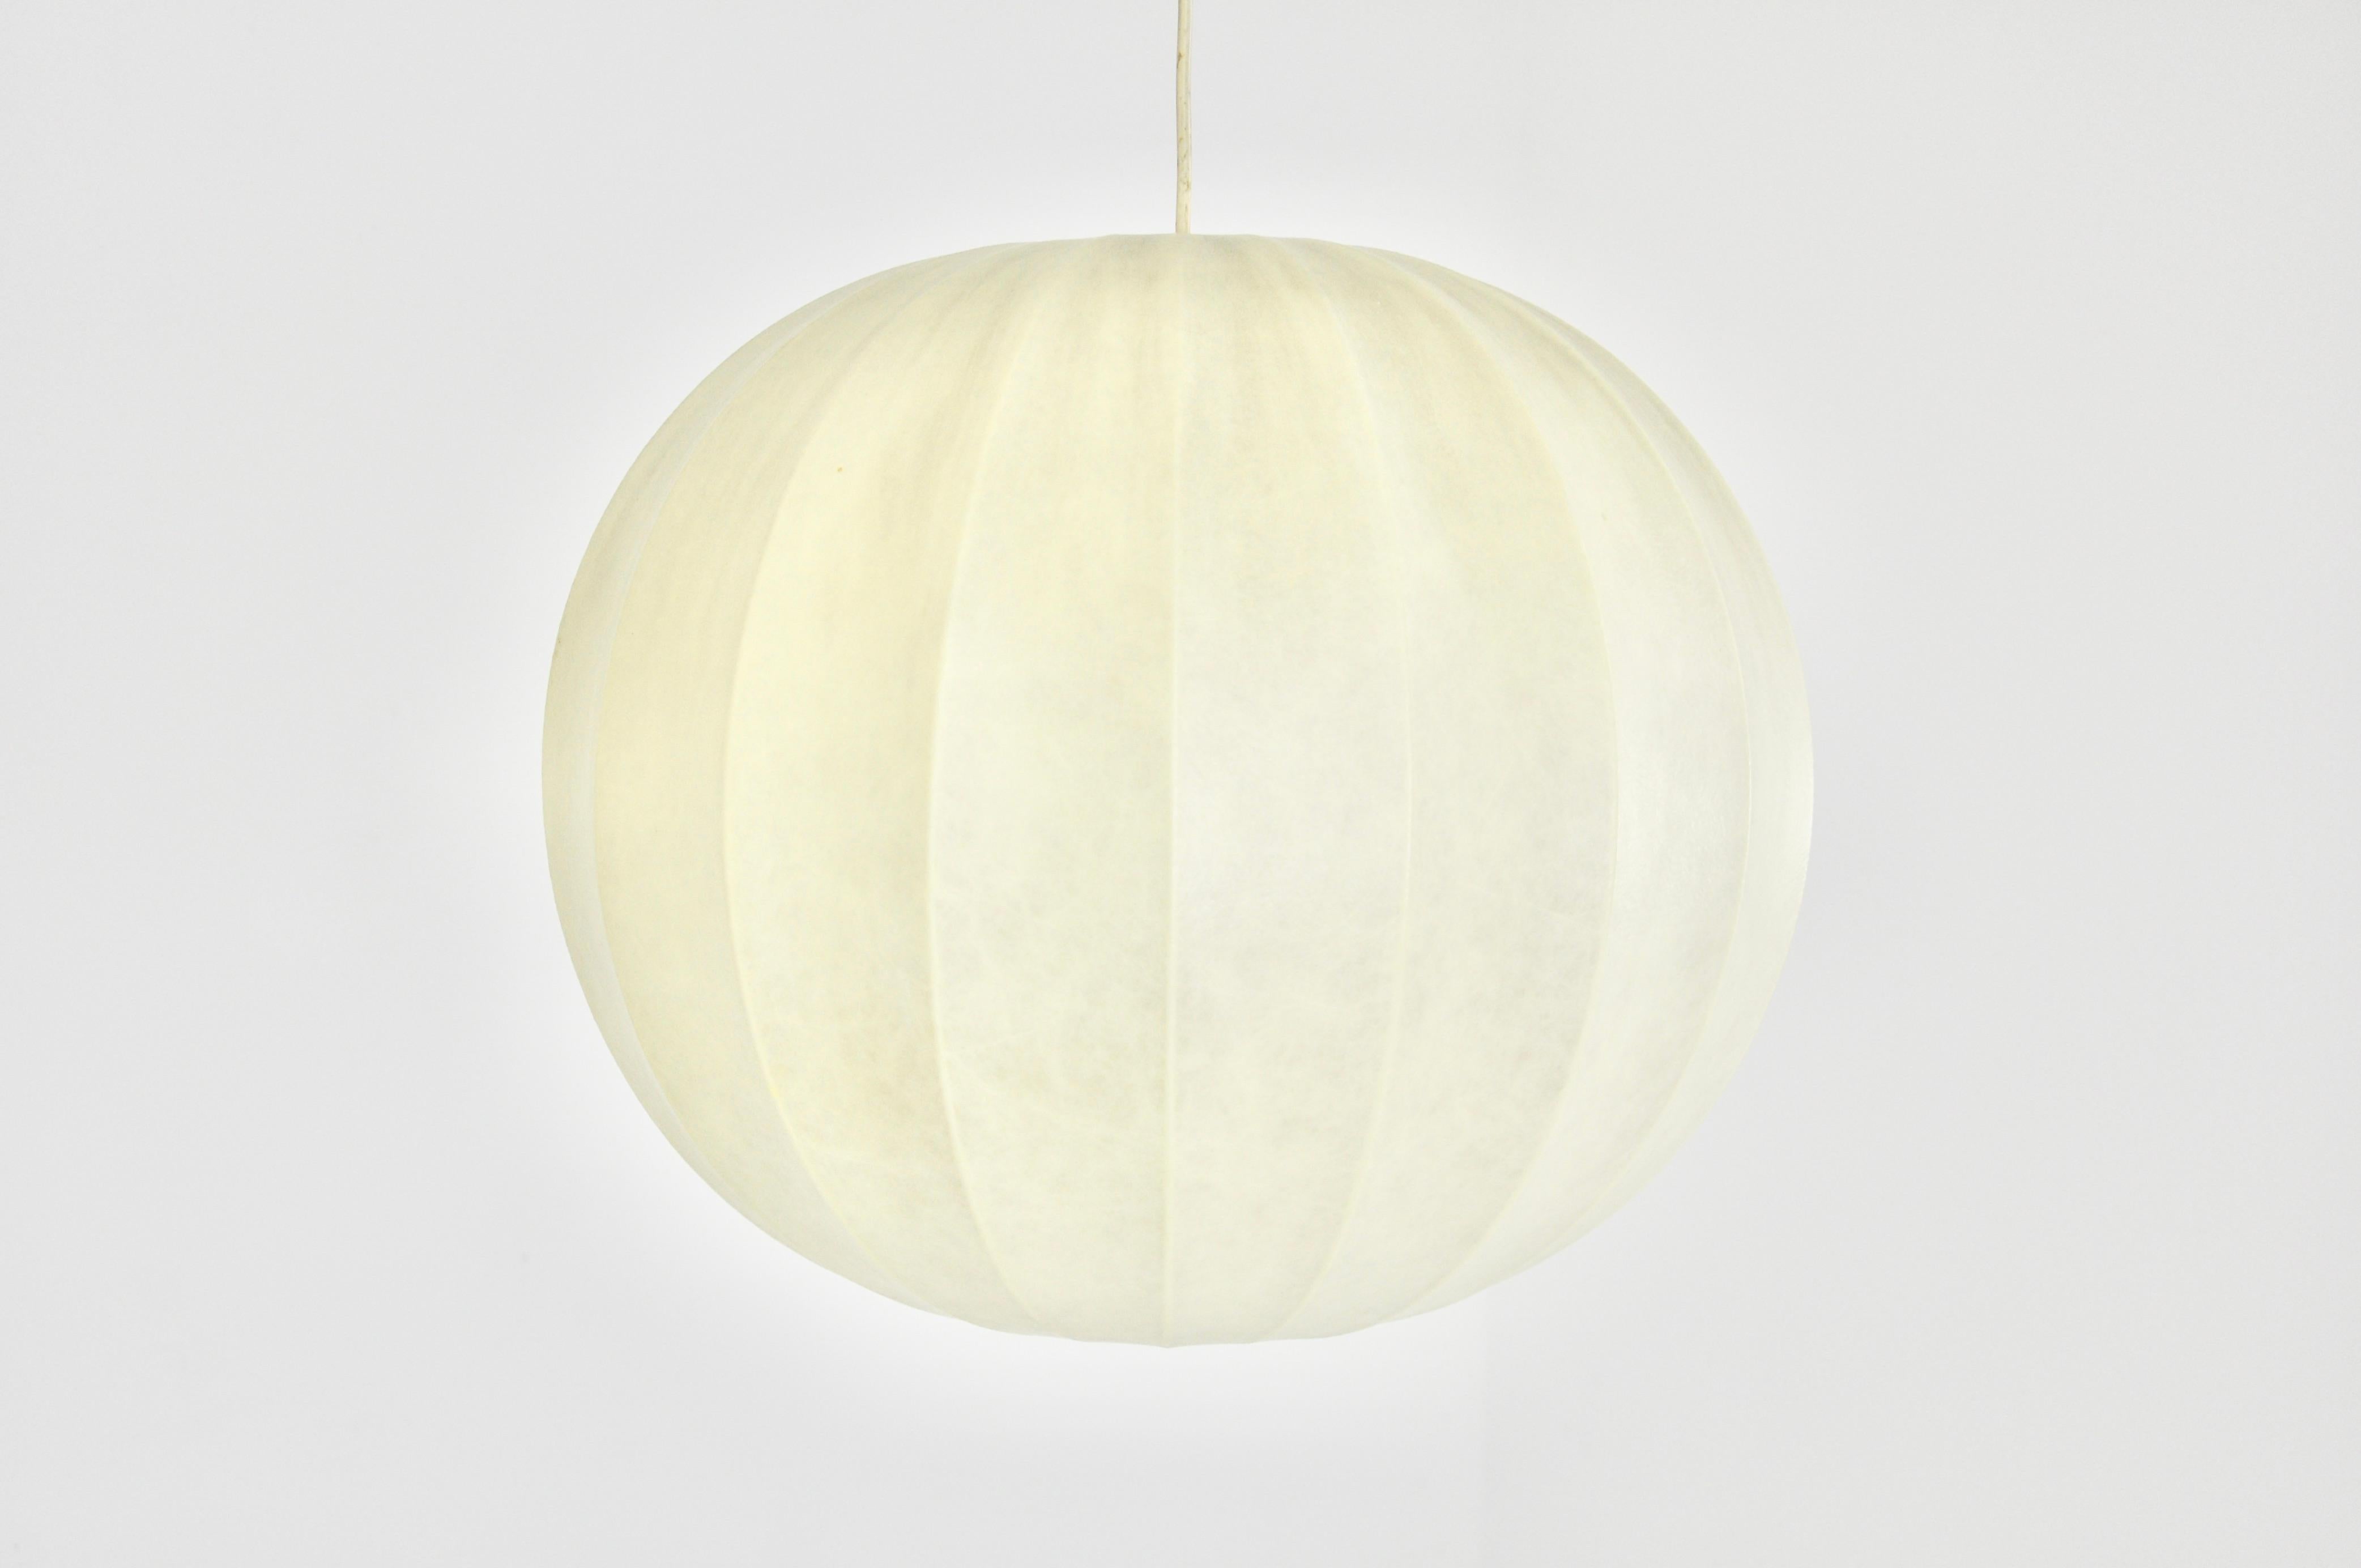 Italian Cocoon Hanging Lamp by Achille & Pier Giacomo Castiglioni for Flos, 1960s For Sale